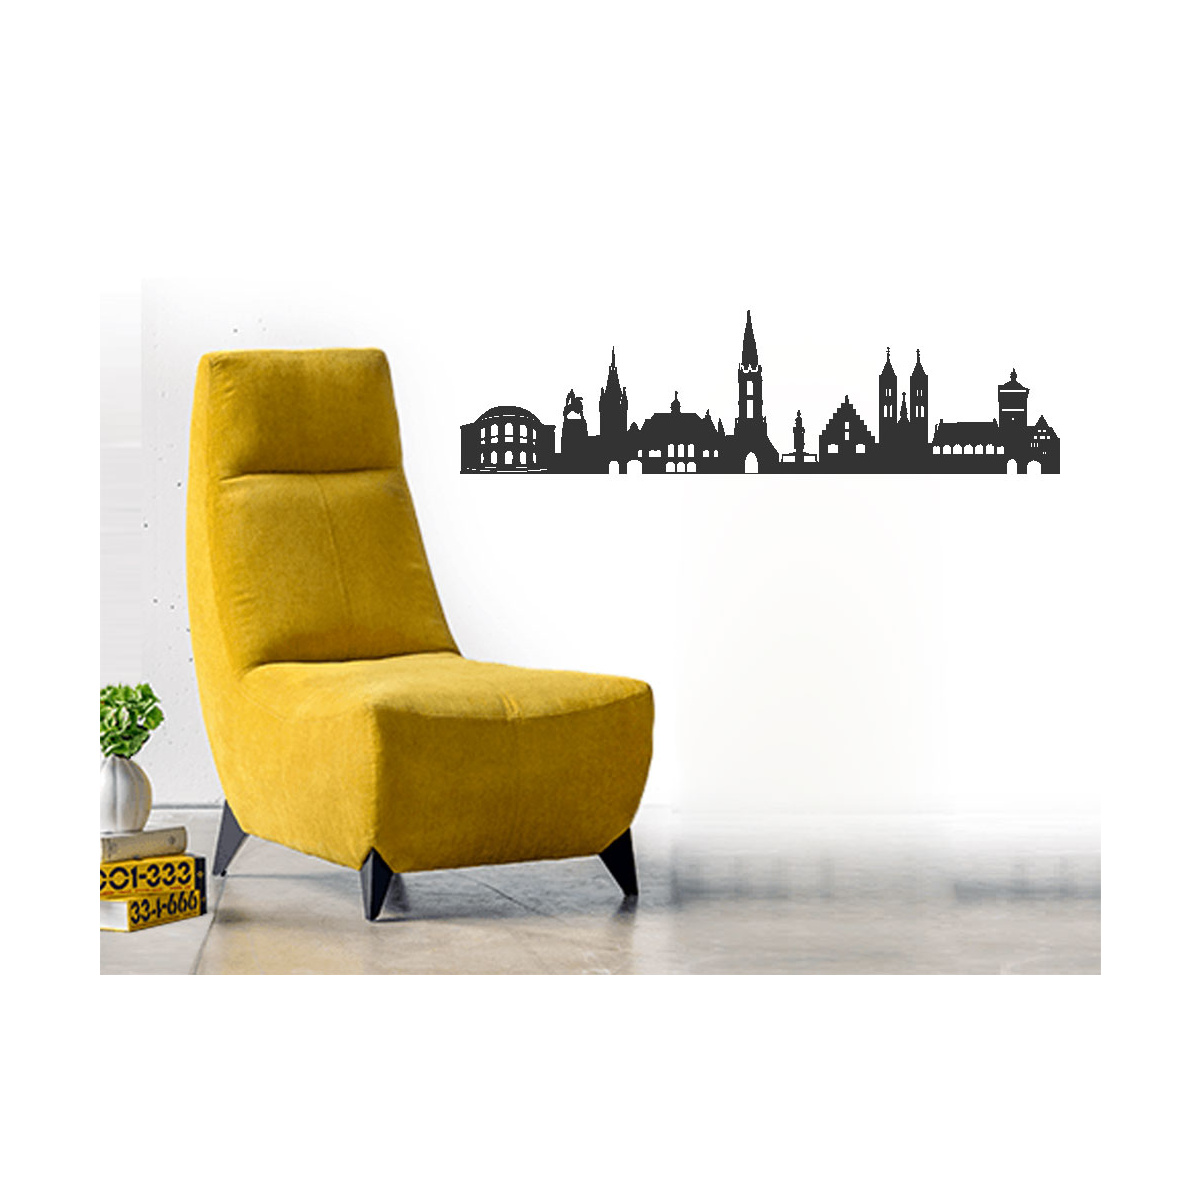 order Wall theme online Freiburg decal tattoo 44spa from with skyline